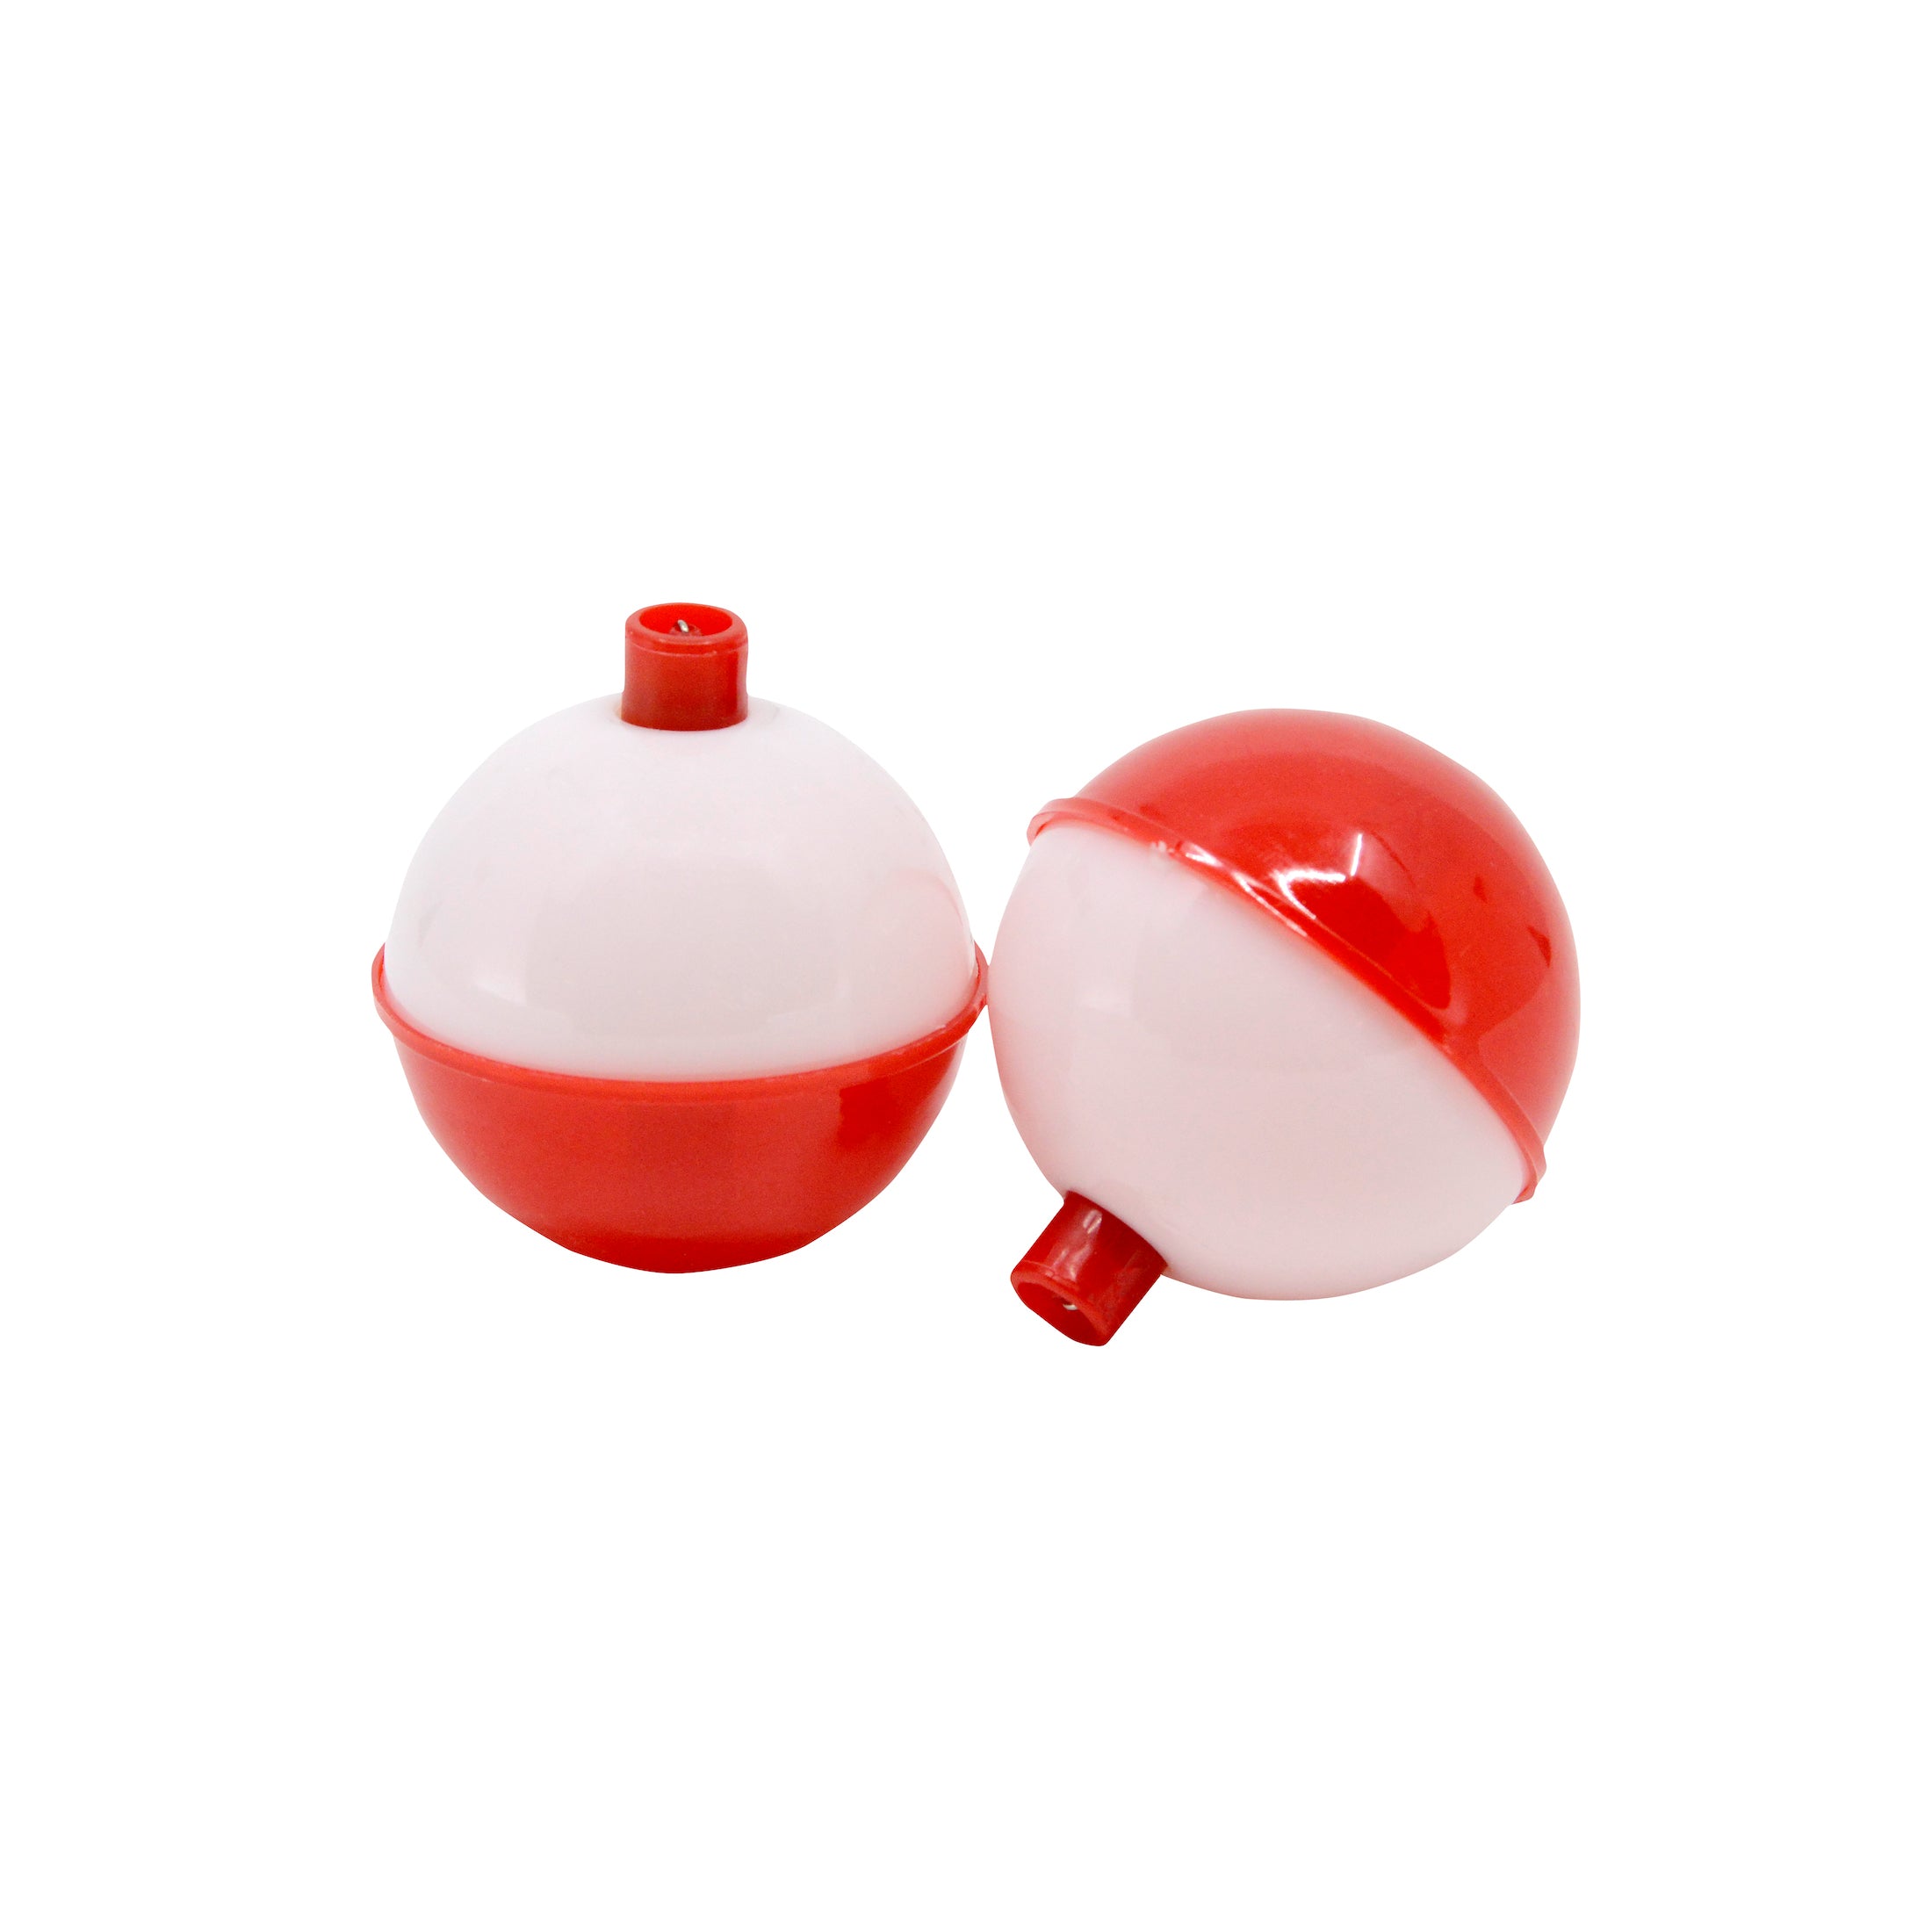 Vanguard Red and White Floats 3-Pack